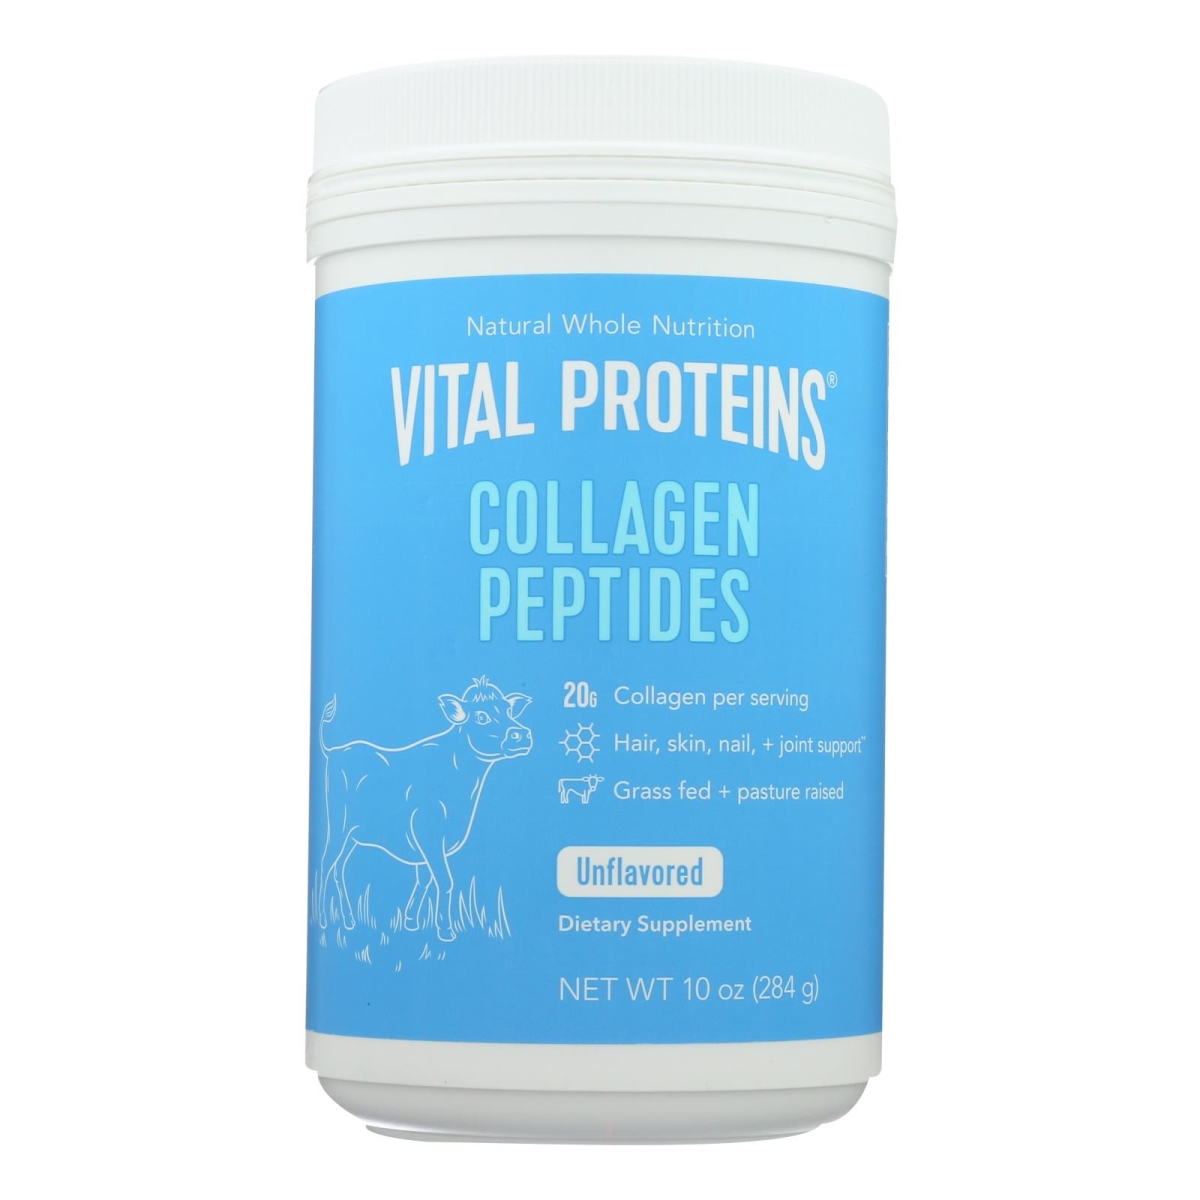 Picture of Vital Proteins HG2511319 10 oz Collagen Peptides Dietary Supplement